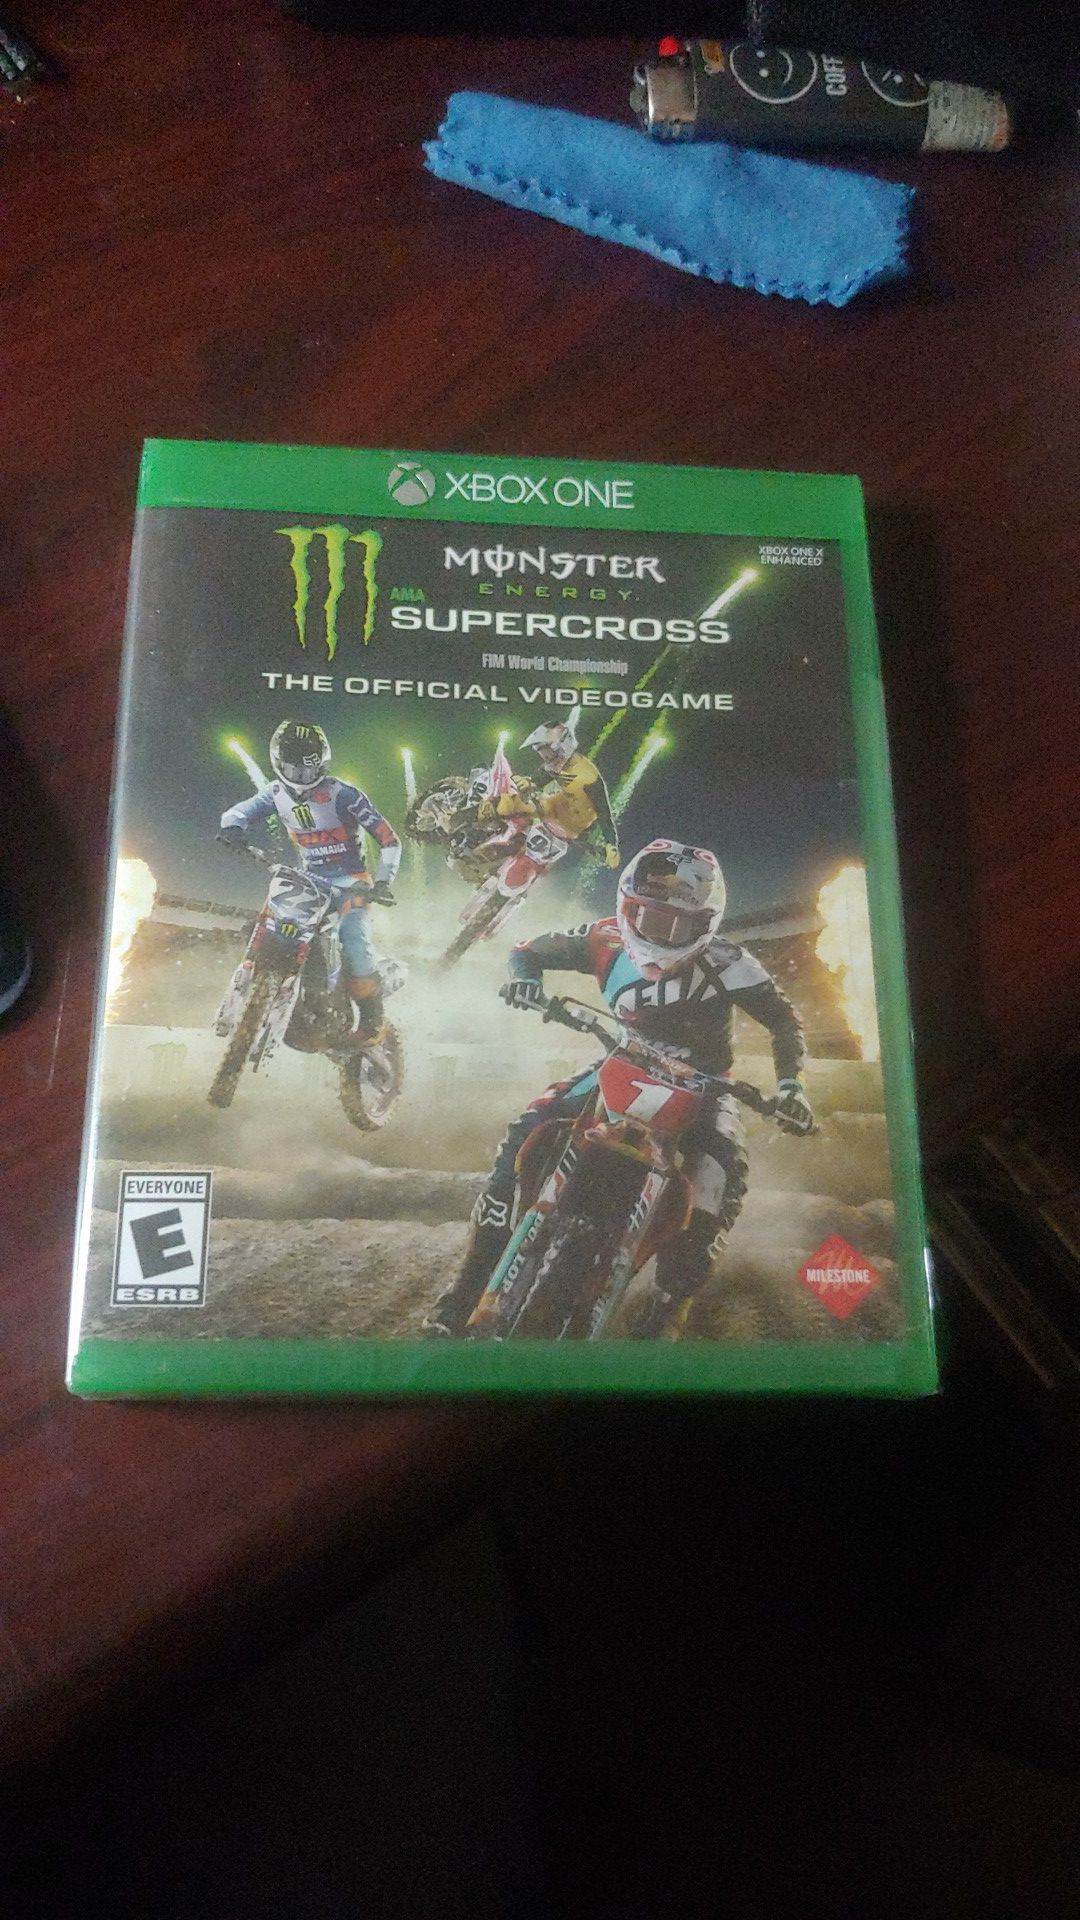 XBOX ONE ENHANCED/ MONSTER ENERGY SUPERCROSS /THE OFFICIAL VIDEOGAME/ NEW, UNOPENED AND IN ORIGINAL PACKAGING